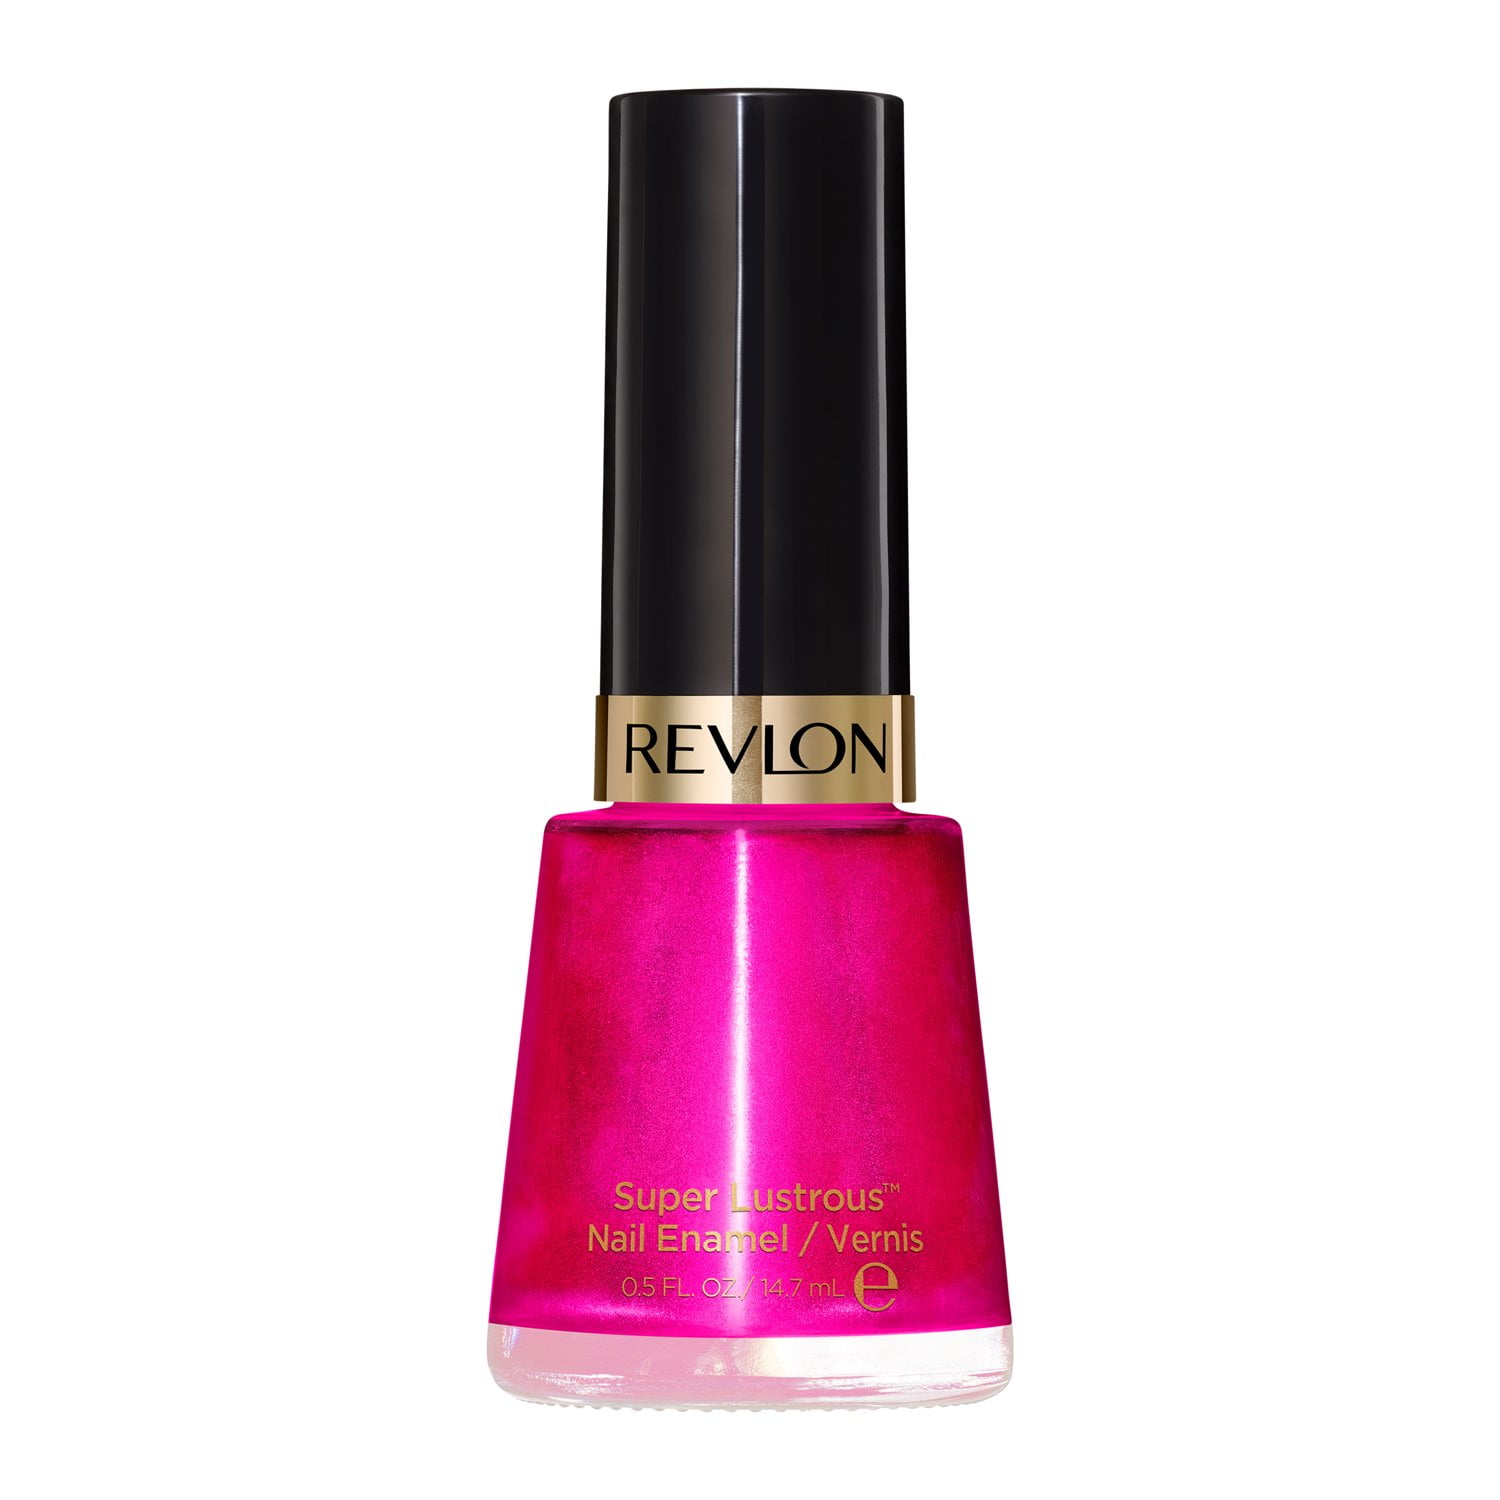 Seven Nail Polish Colors To Try This Summer | Alyson Haley